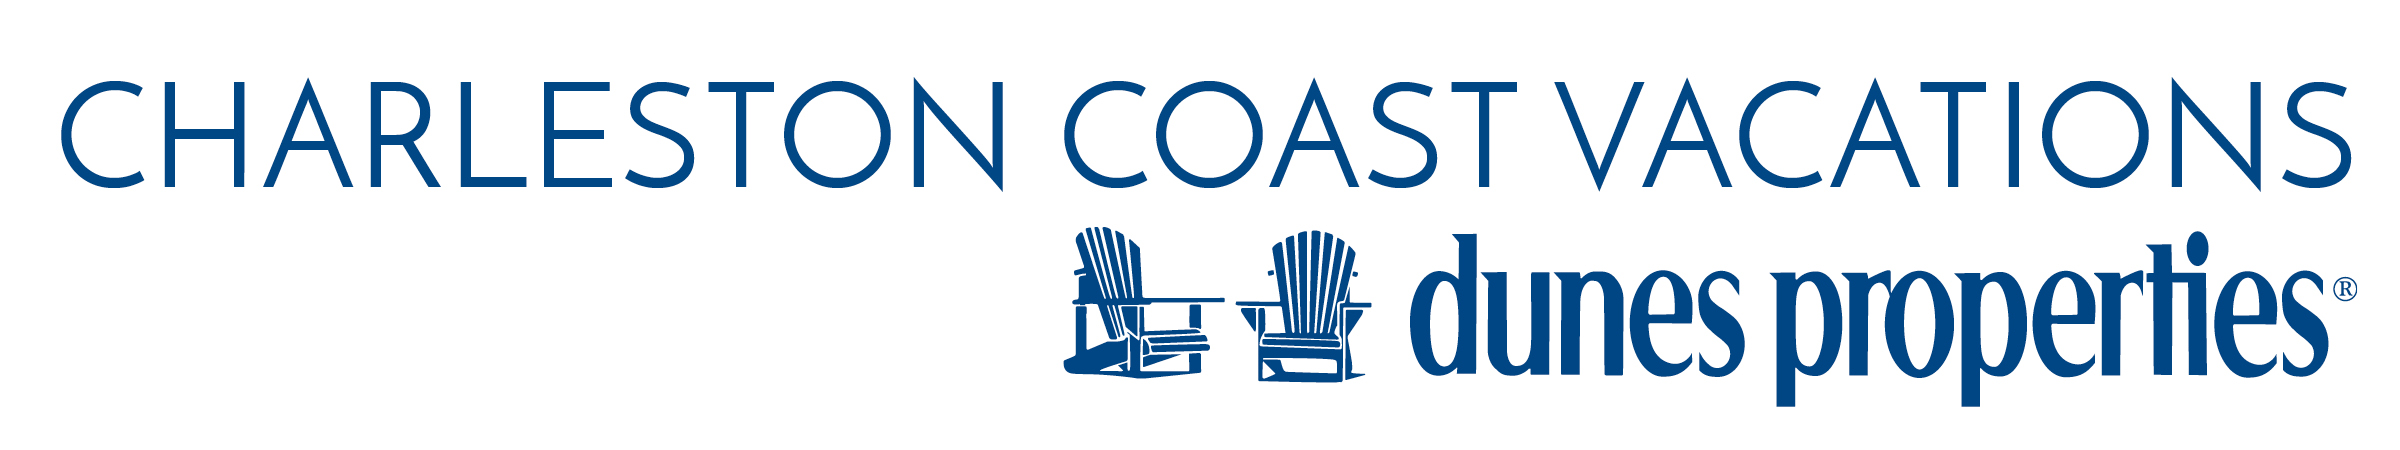 Charleston Coast Vacations, Frequently Asked Questions